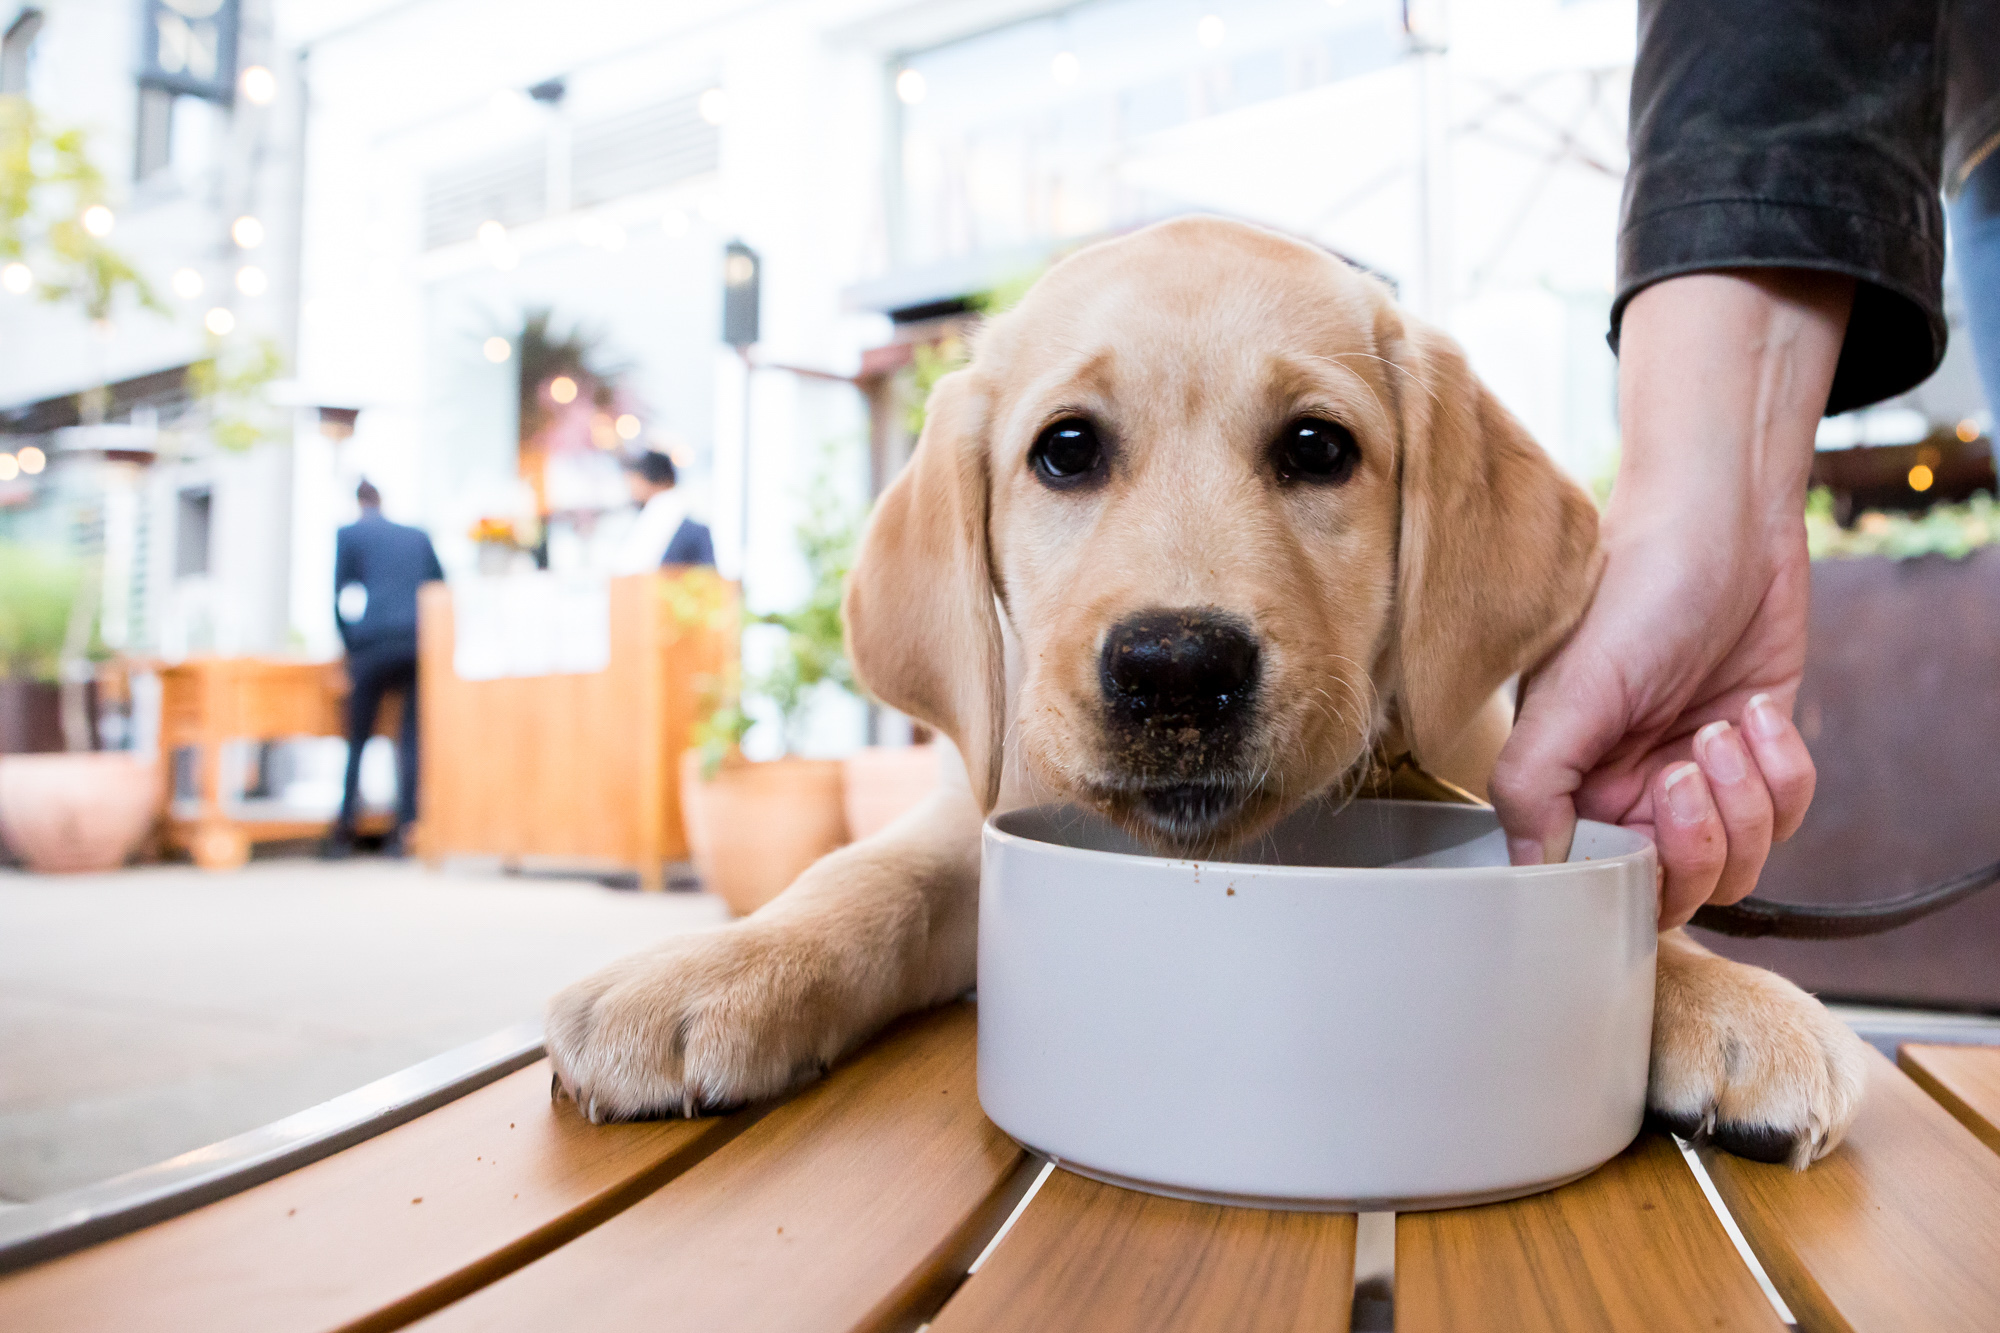 A yellow English lab puppy sitting at a table with a bowl of food.